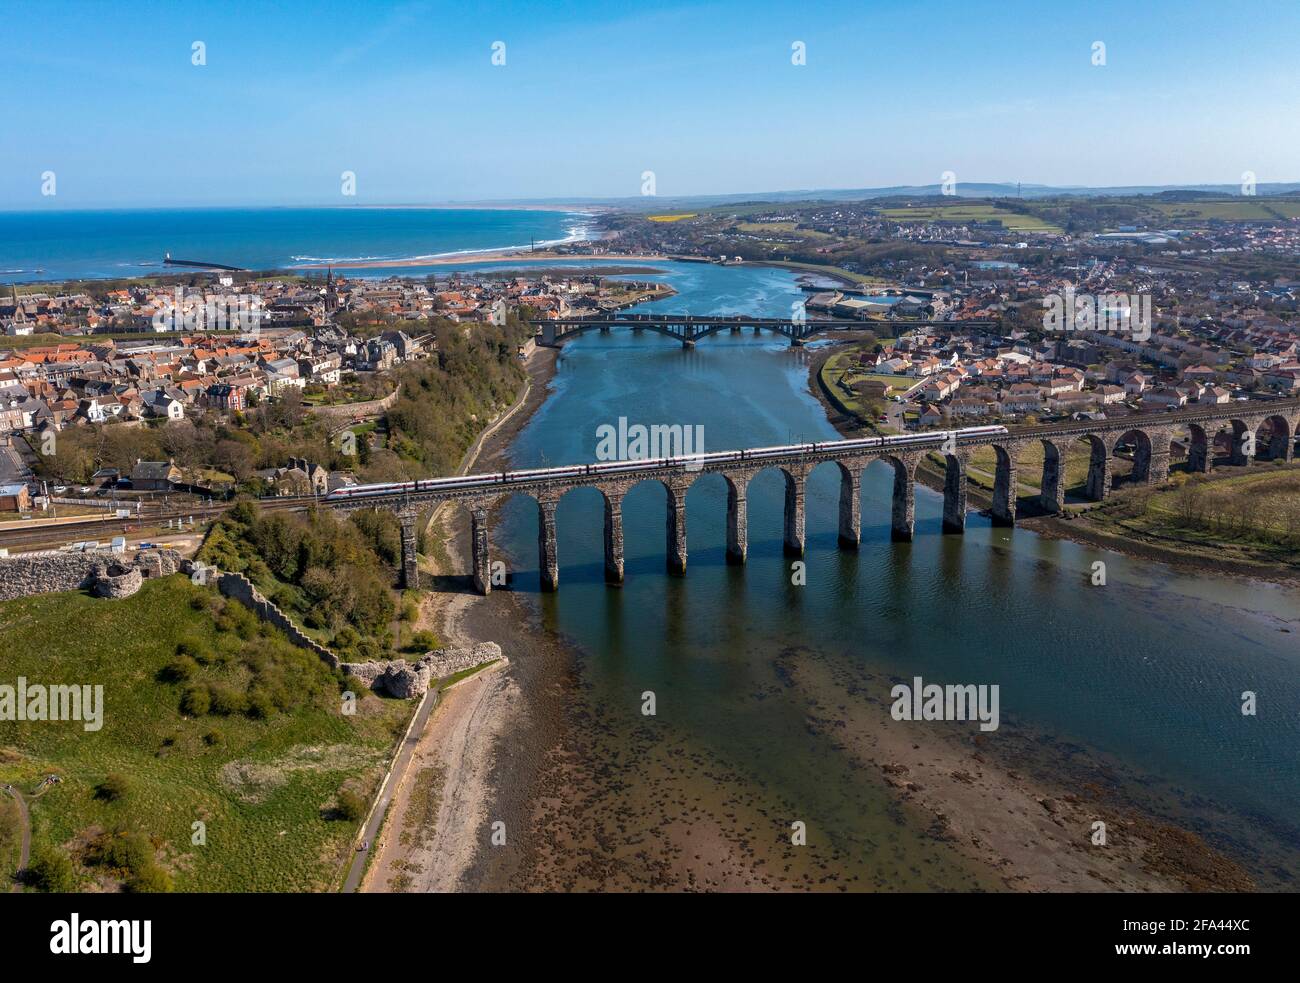 Aerial view showing a train crossing the Border Rail Bridge at Berwick Upon Tweed, Northumberland, England. Stock Photo